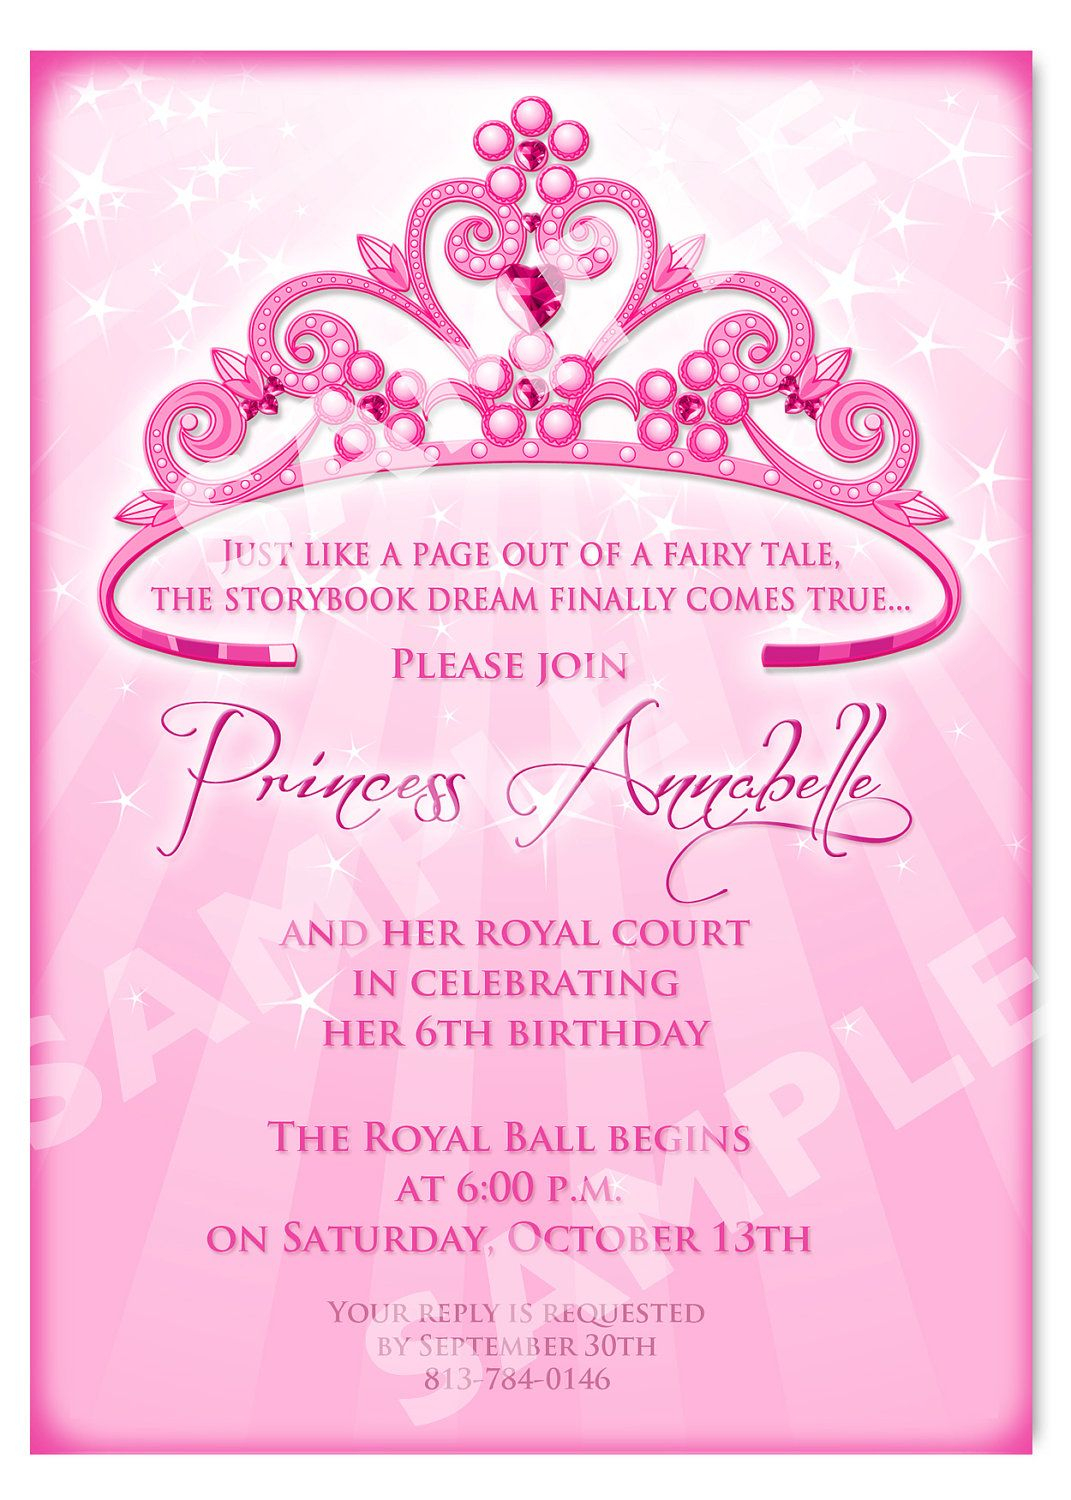 Printable Princess Invitation Cards Birthday Party Ideas for size 1071 X 1500